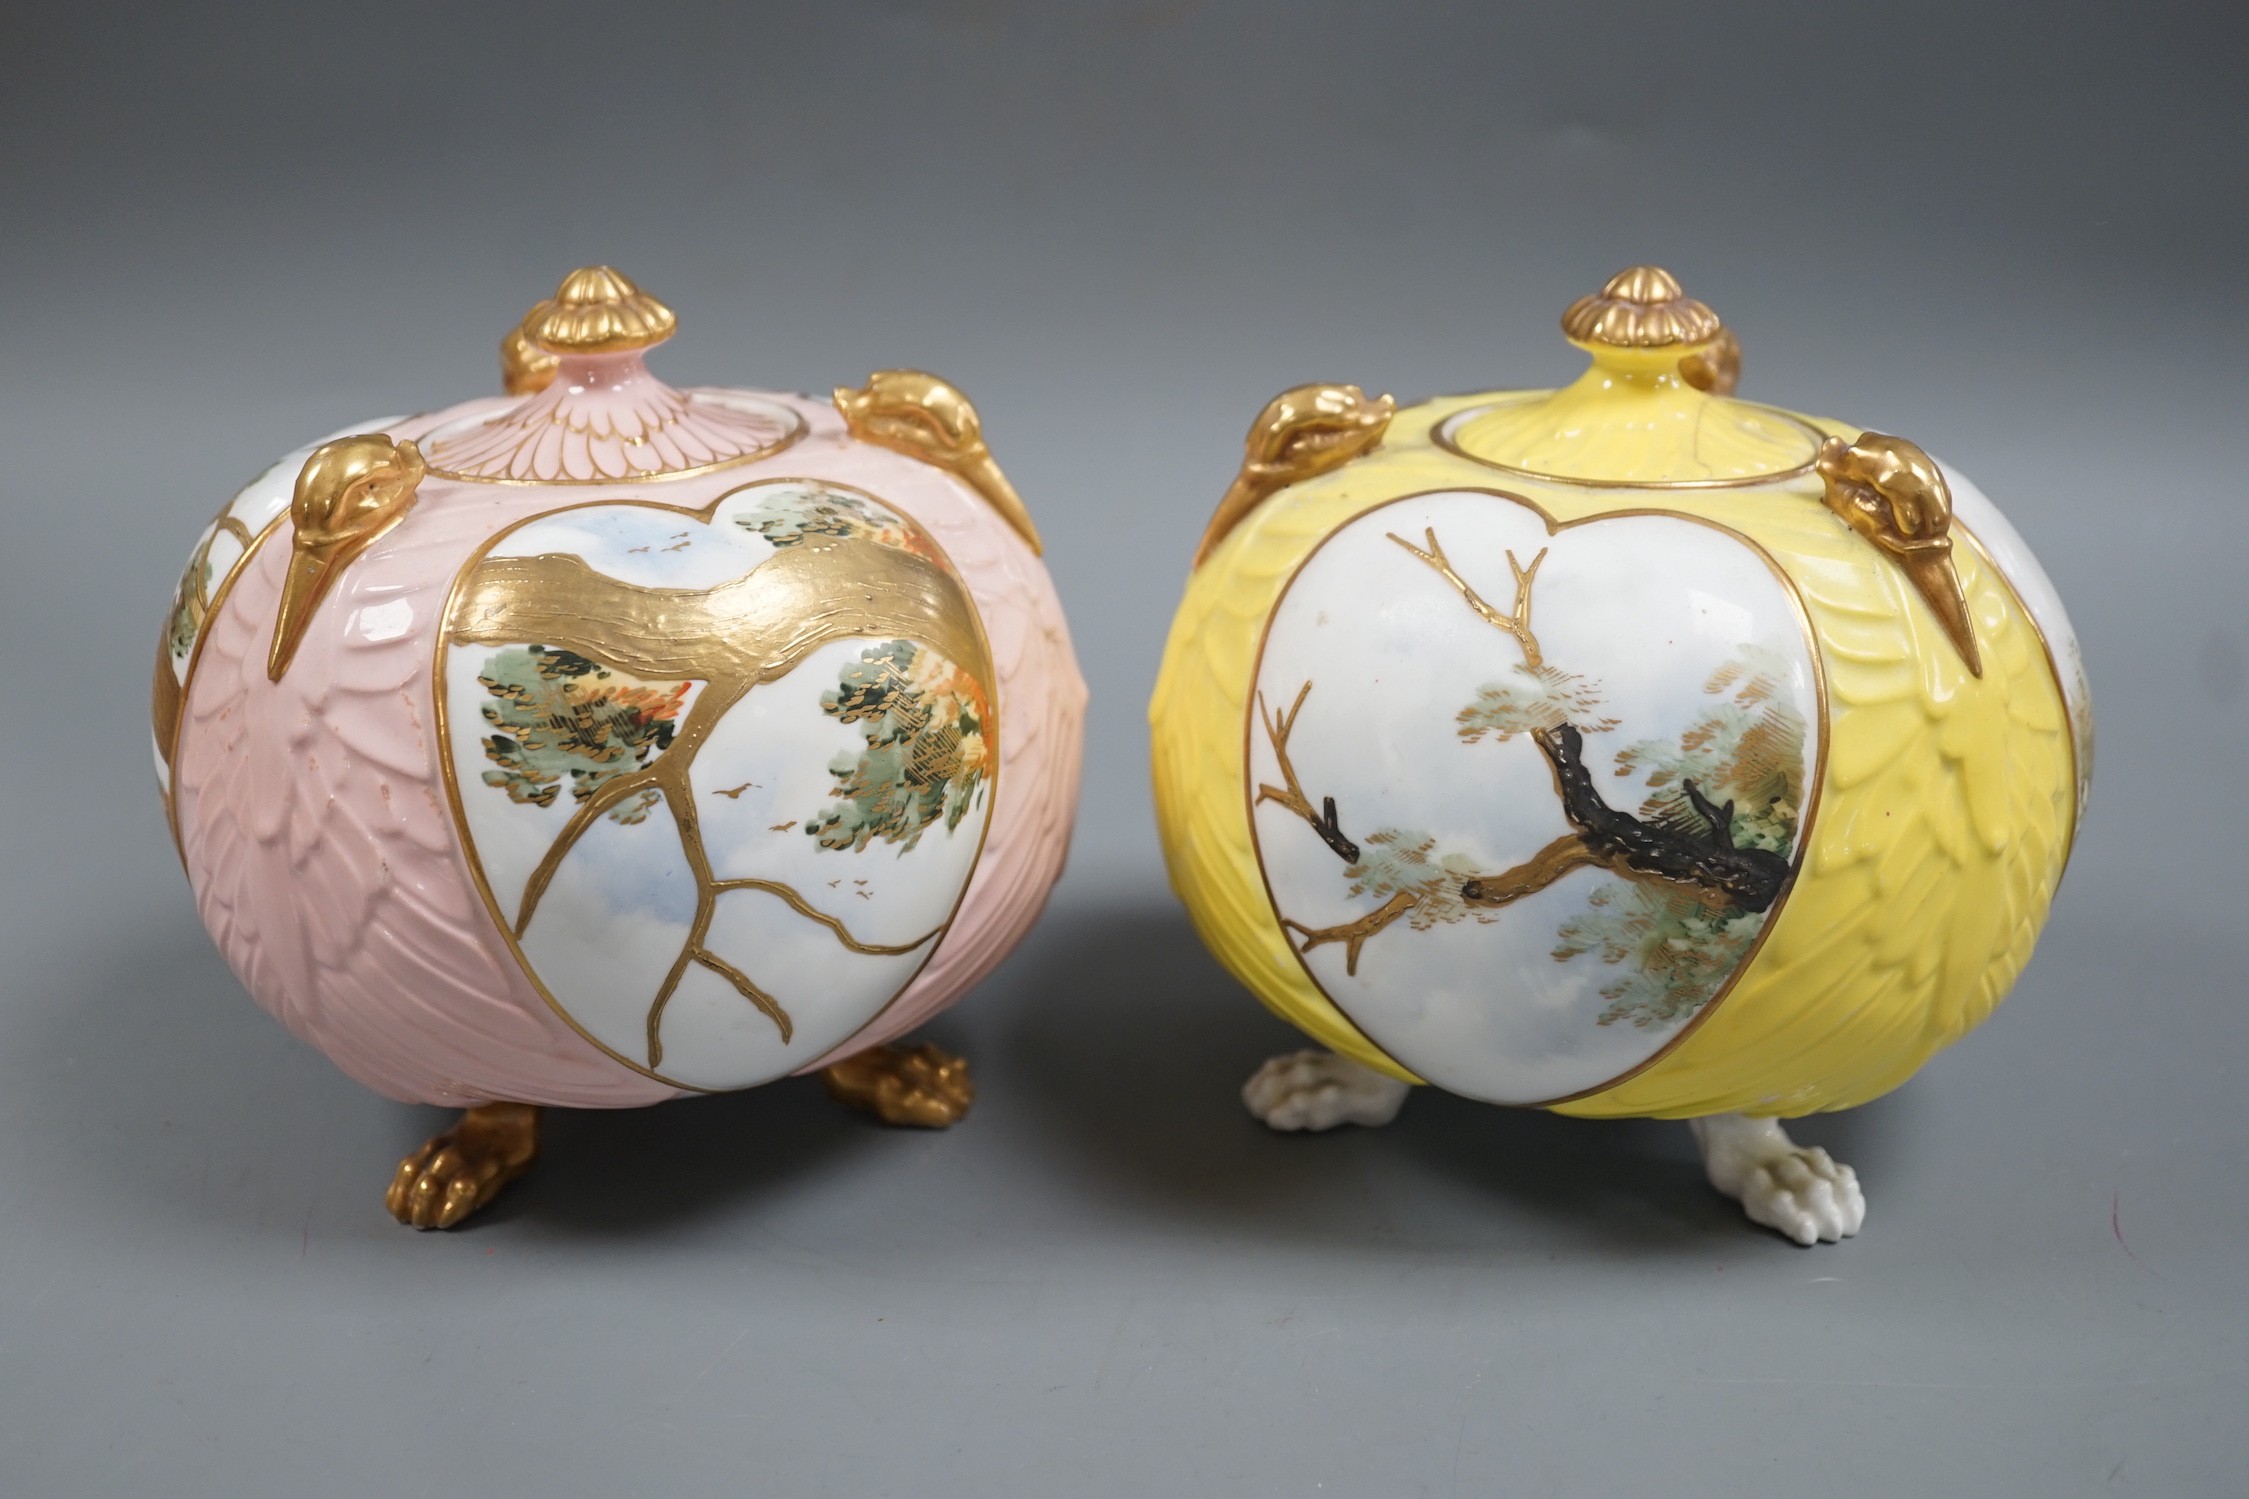 A pair of English porcelain Aesthetic period jars and covers, late 19th century, 14cm total